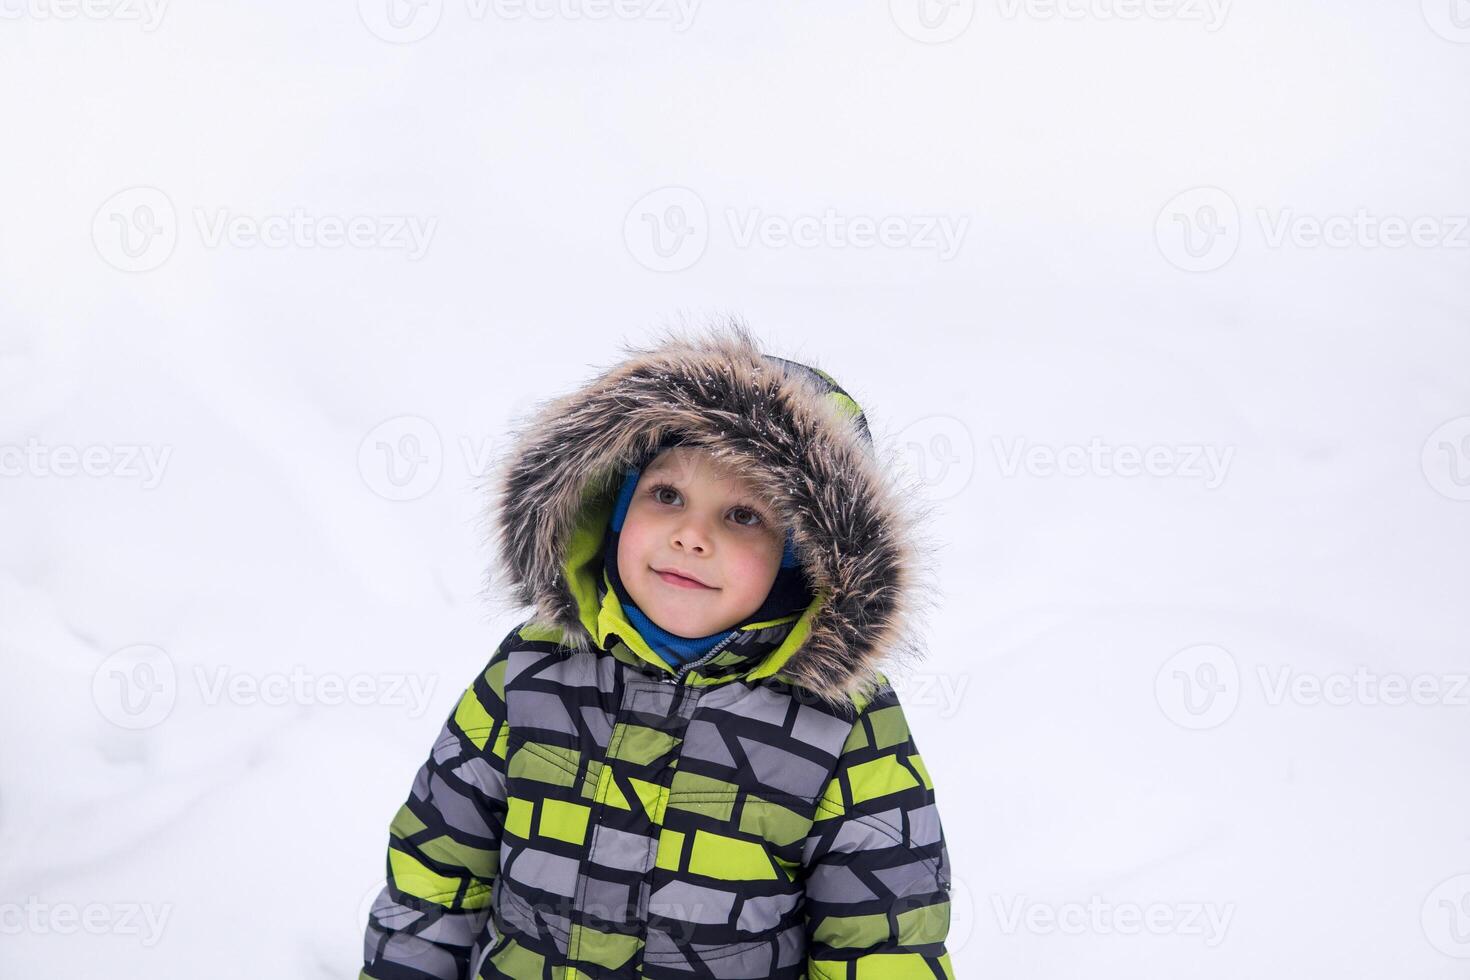 smiling child walking in snowy winter photo